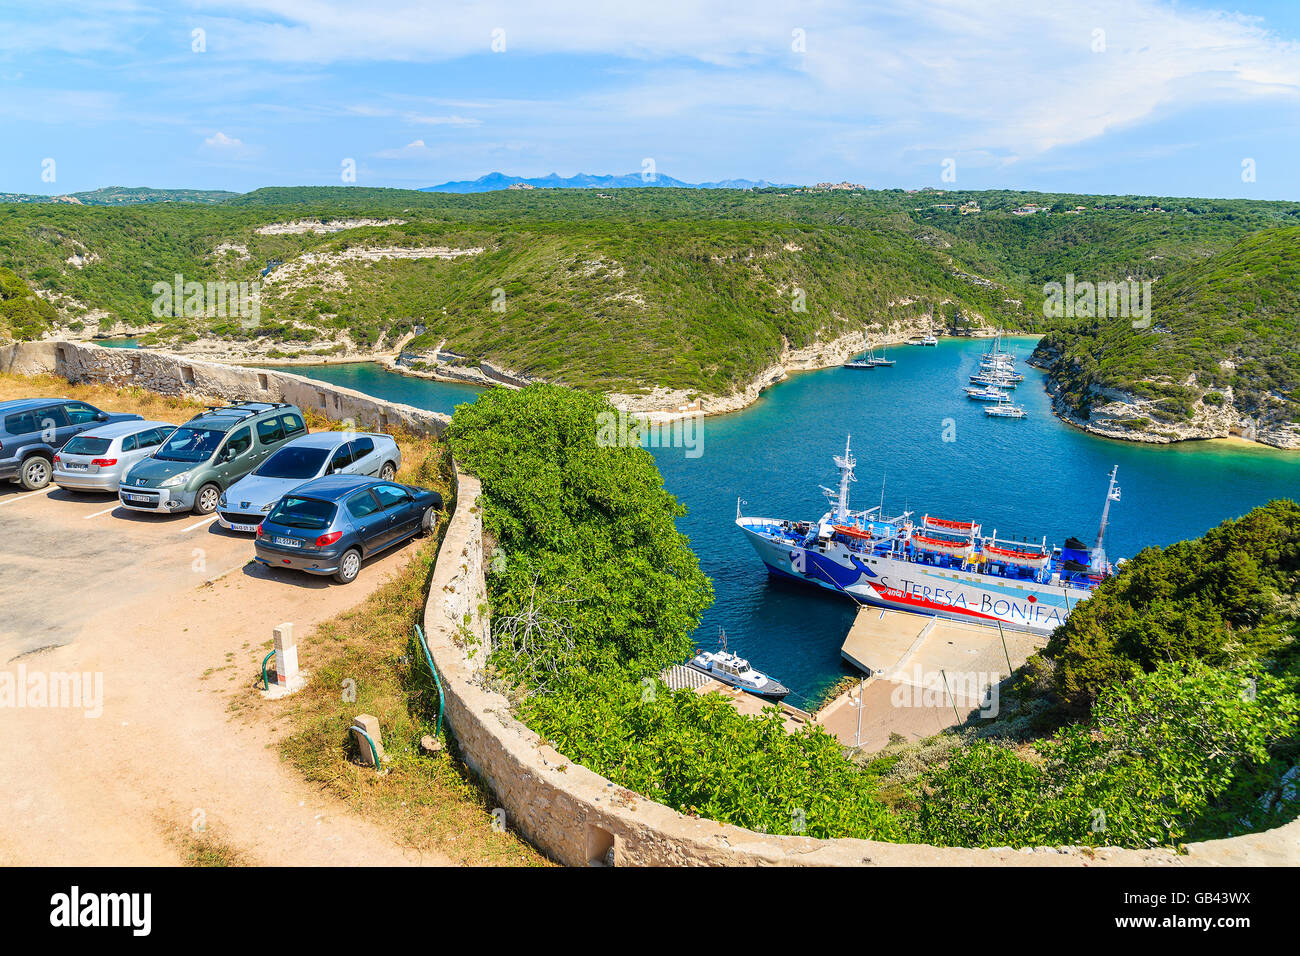 CORSICA ISLAND, FRANCE - JUN 23, 2015: cars parking and ferry boat in Bonifacio port waiting for its daily cruise to Santa Teres Stock Photo